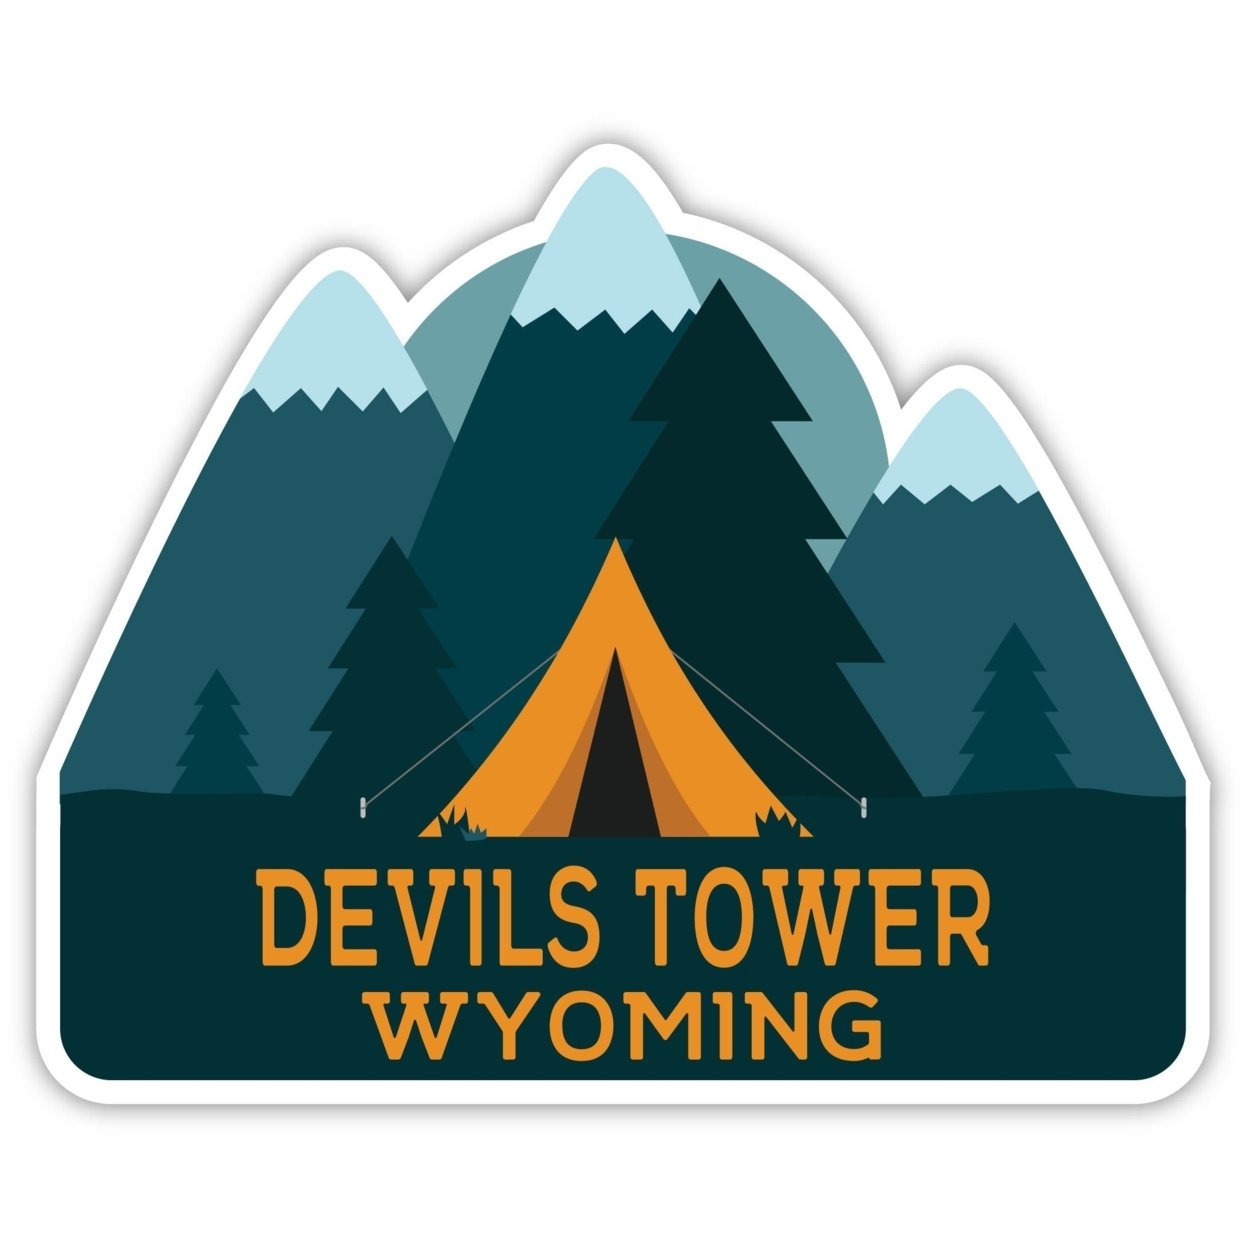 Devils Tower Wyoming Souvenir Decorative Stickers (Choose Theme And Size) - Single Unit, 8-Inch, Great Outdoors